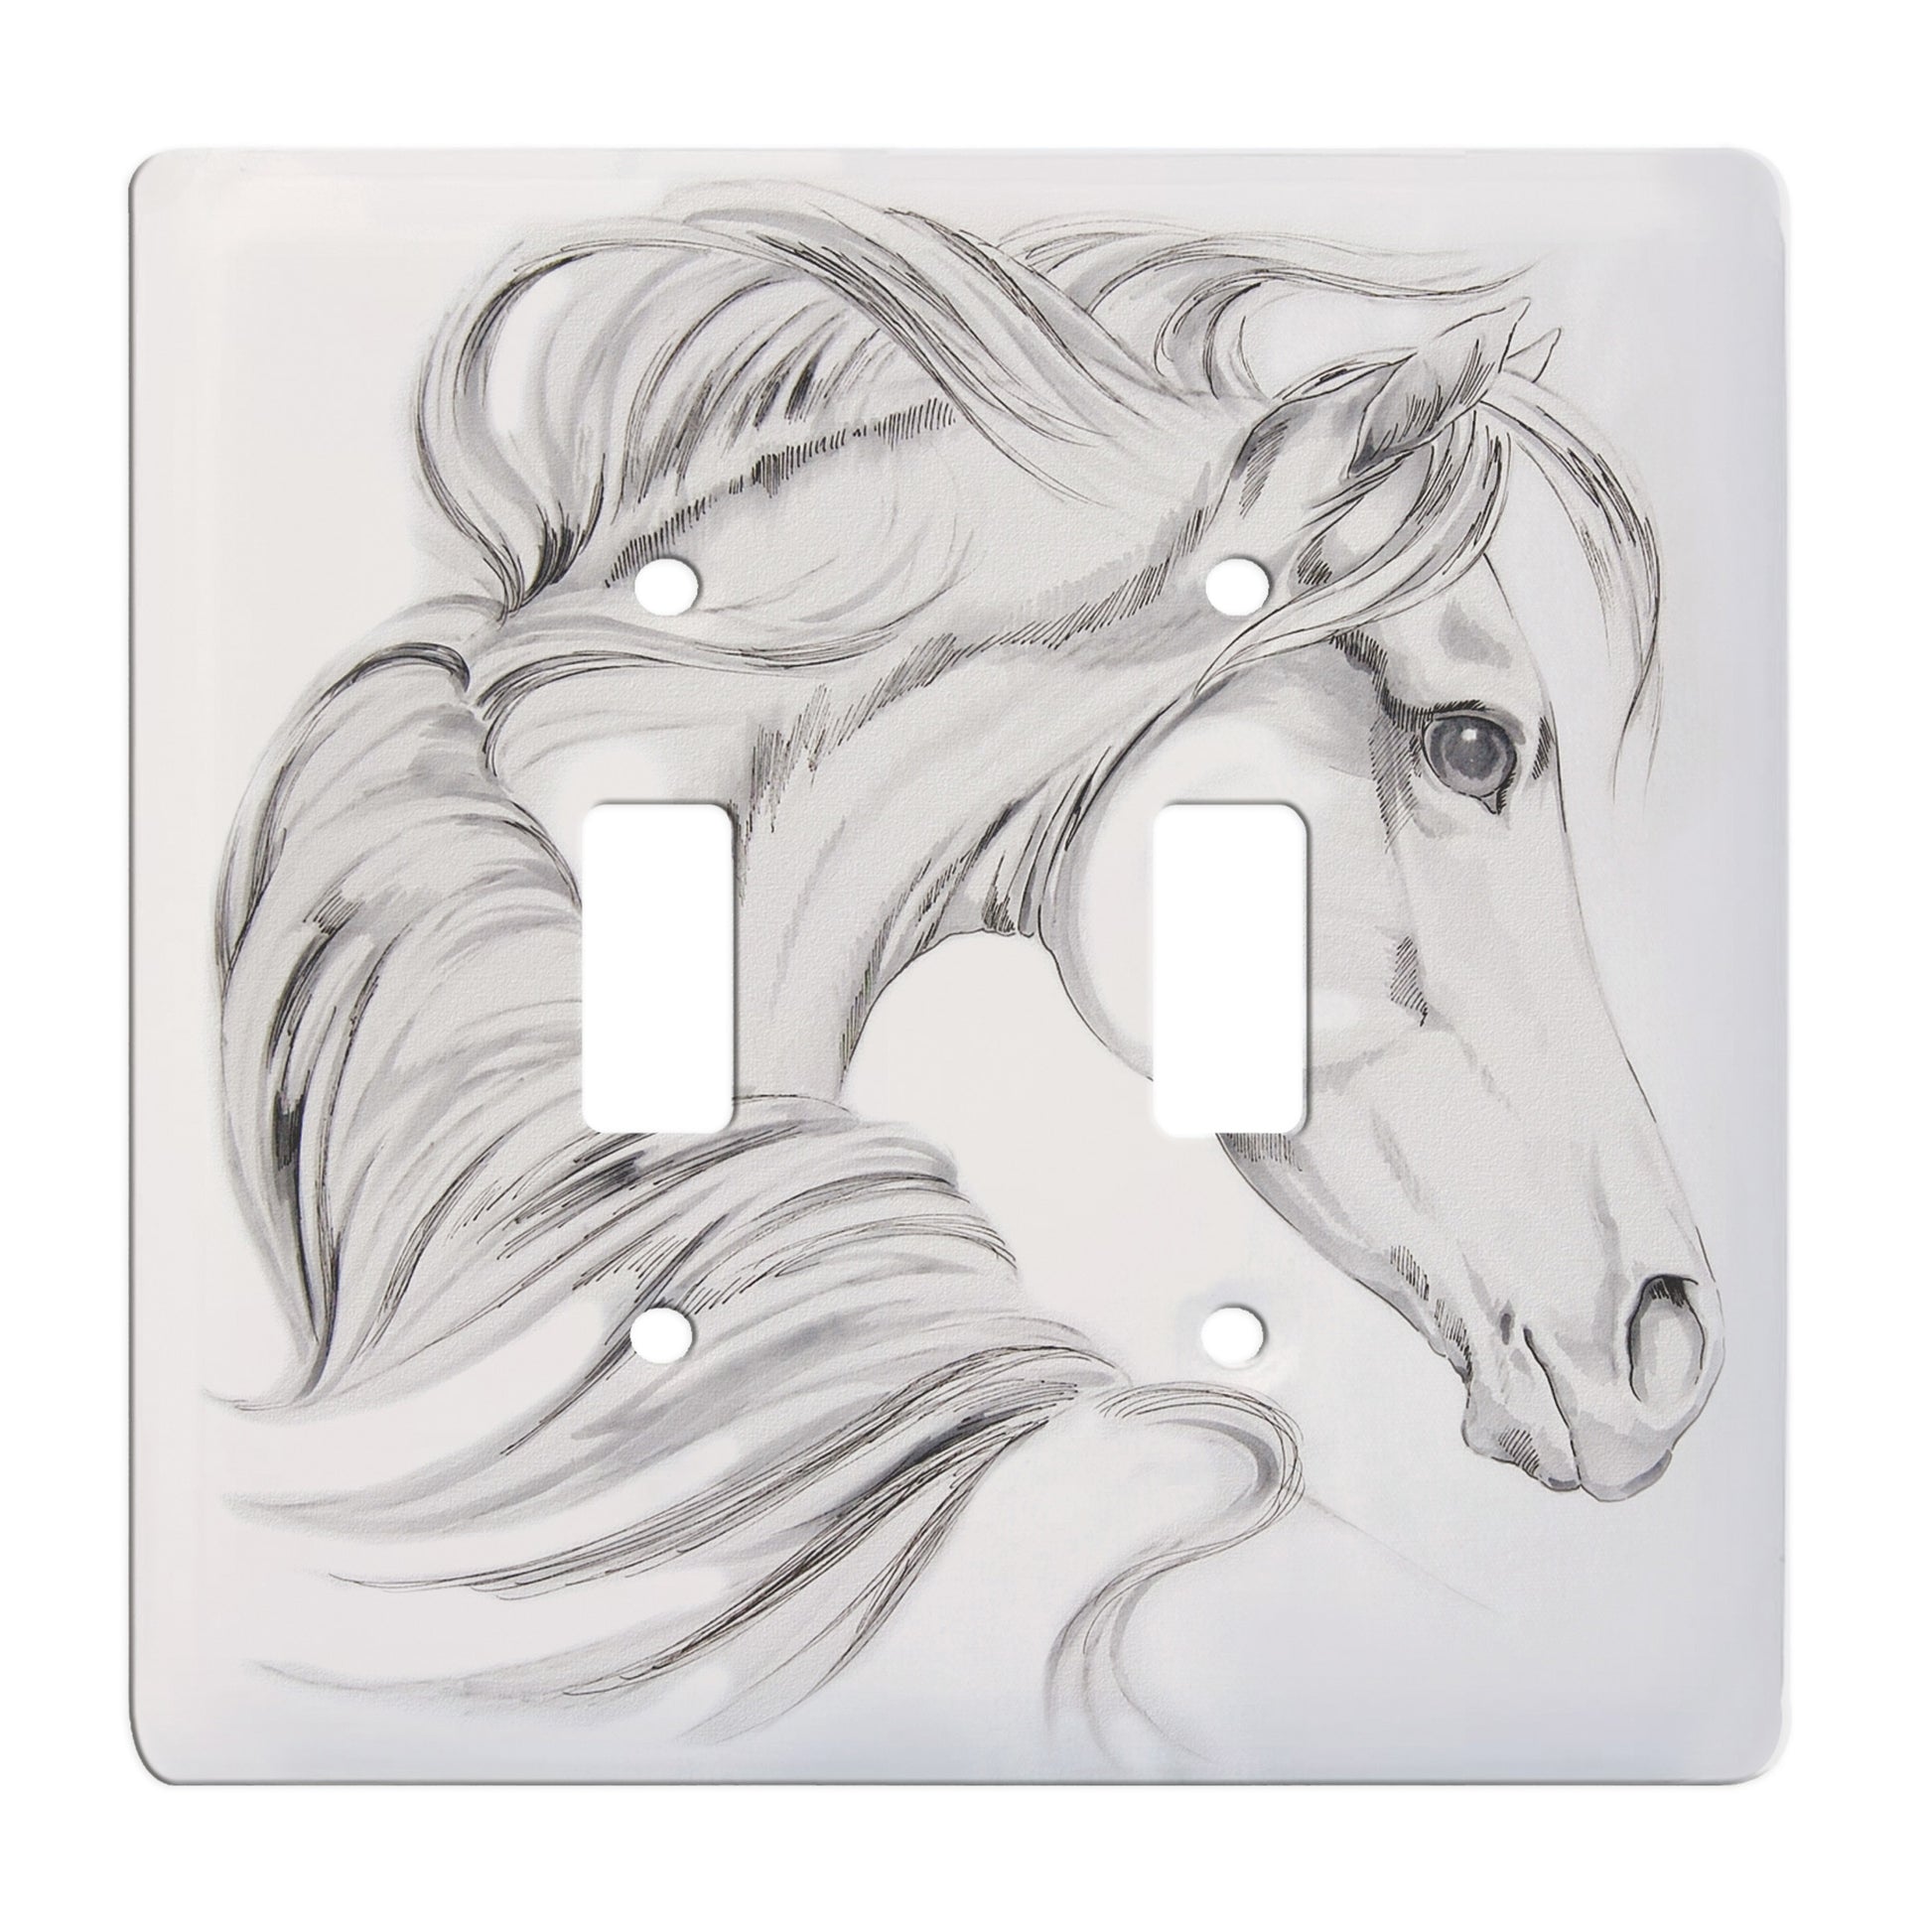 ceramic double toggle switch plate featuring a gray illustrative graphic of a horse bust facing right.